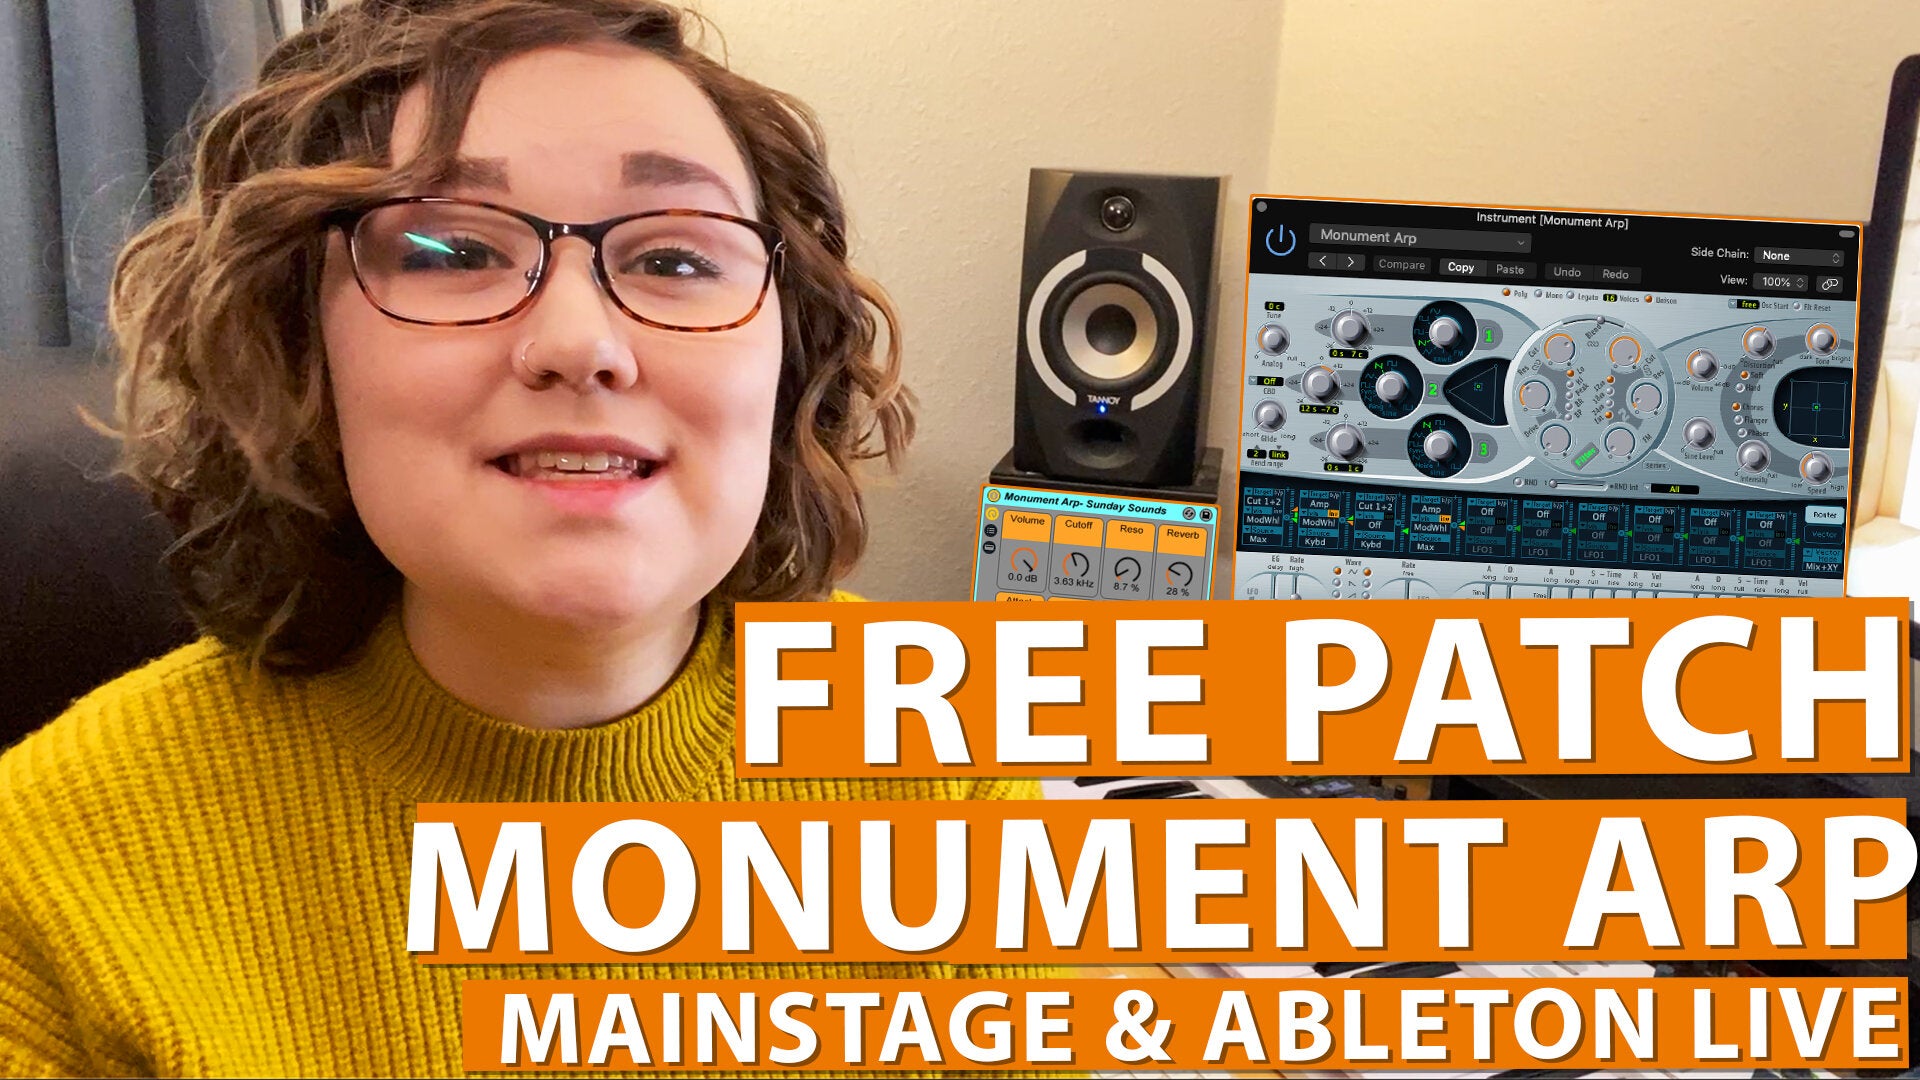 Free MainStage & Ableton Worship Patch! - Monument Arp